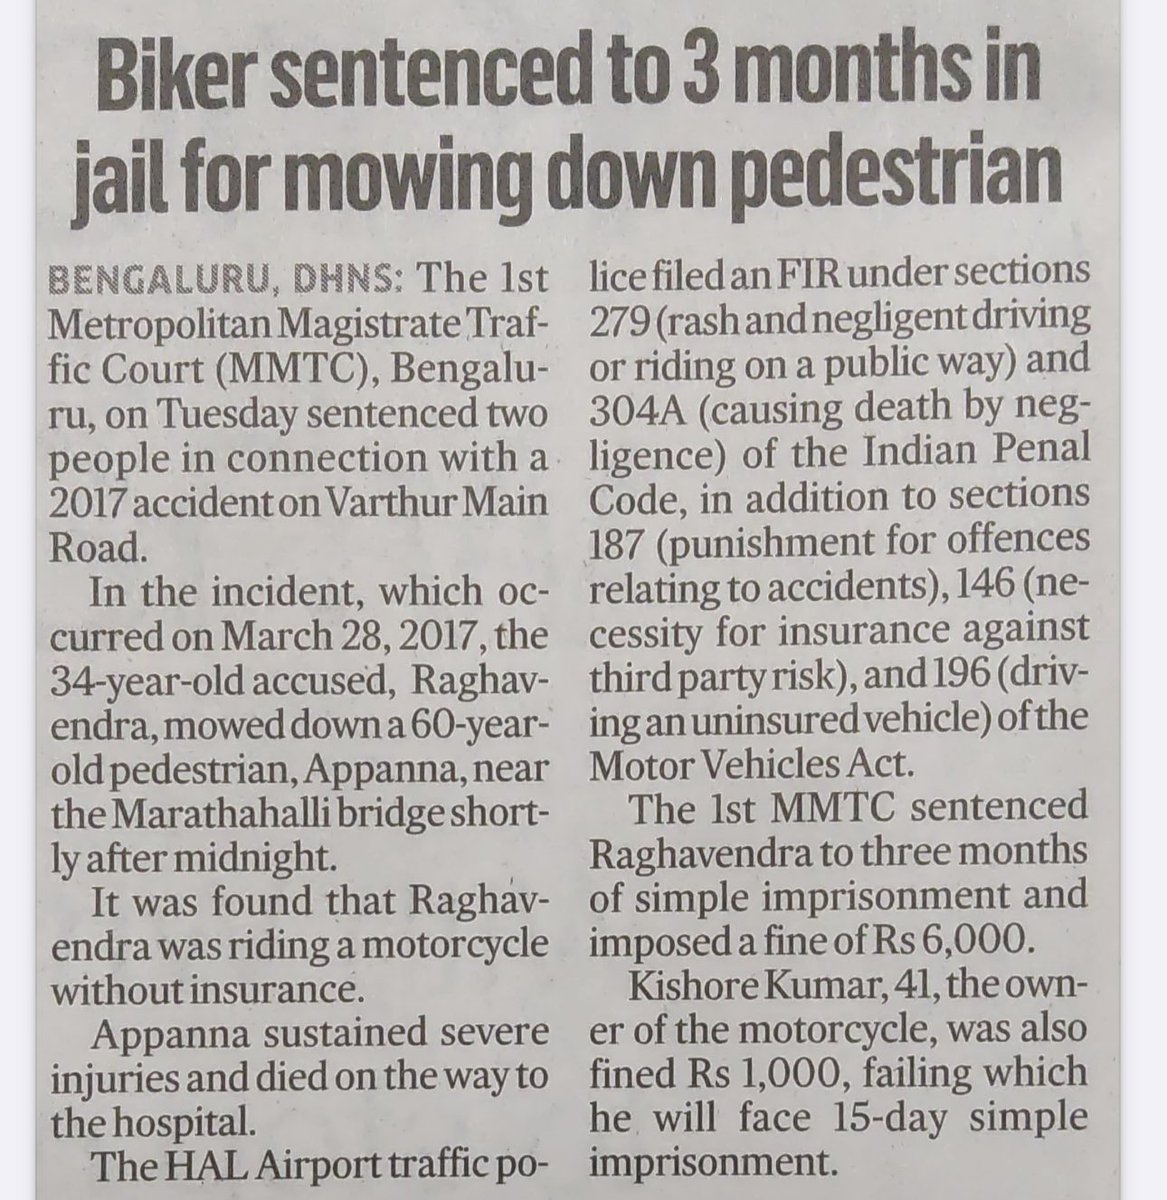 Conviction in an accident case of 2017 by ⁦@halairporttrfps⁩. A proper Court Monitoring Cell is active to follow up on trail of fatal cases. In last 3 months, 6 such convictions are achieved with punishment ranging from 3 months to 2 years. ⁦⁦⁦@blrcitytraffic⁩